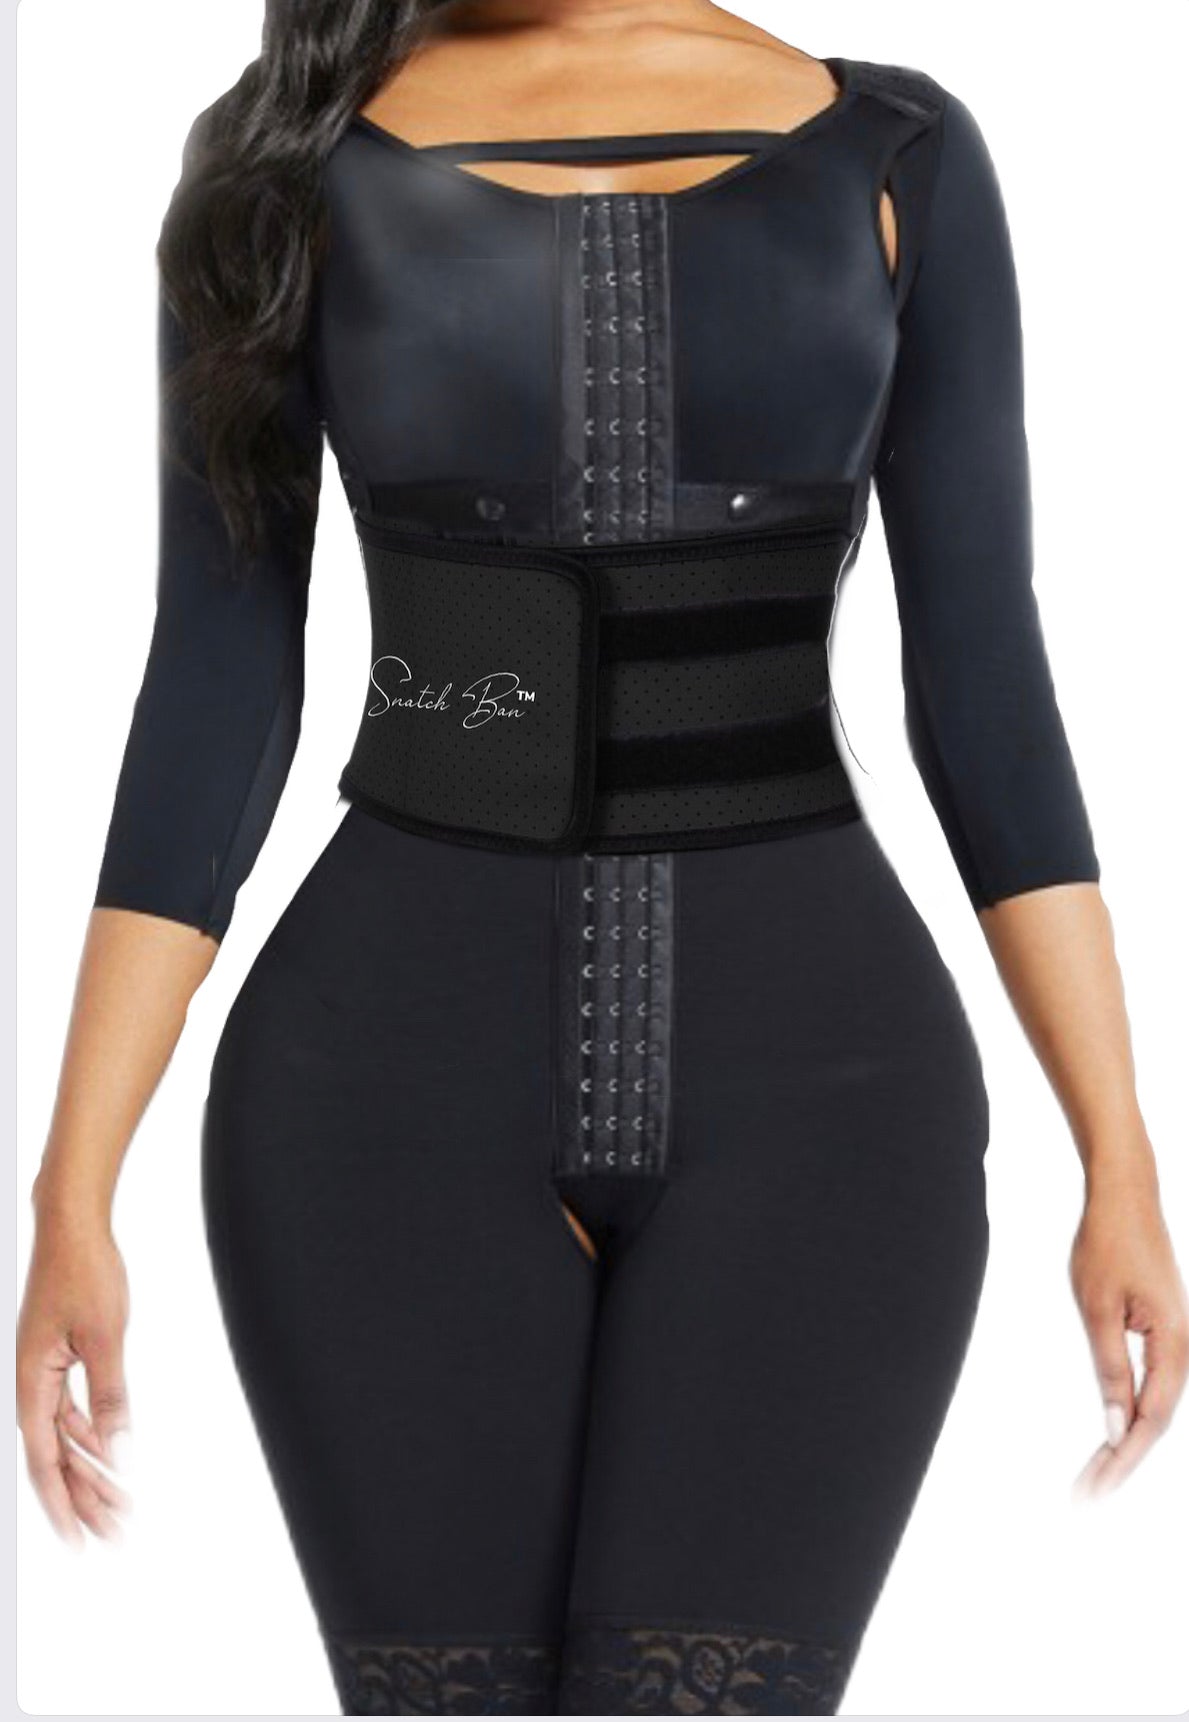 SOLD OUT!! - Liza 26 Firm Black Lace Hourglass Body Shaper With